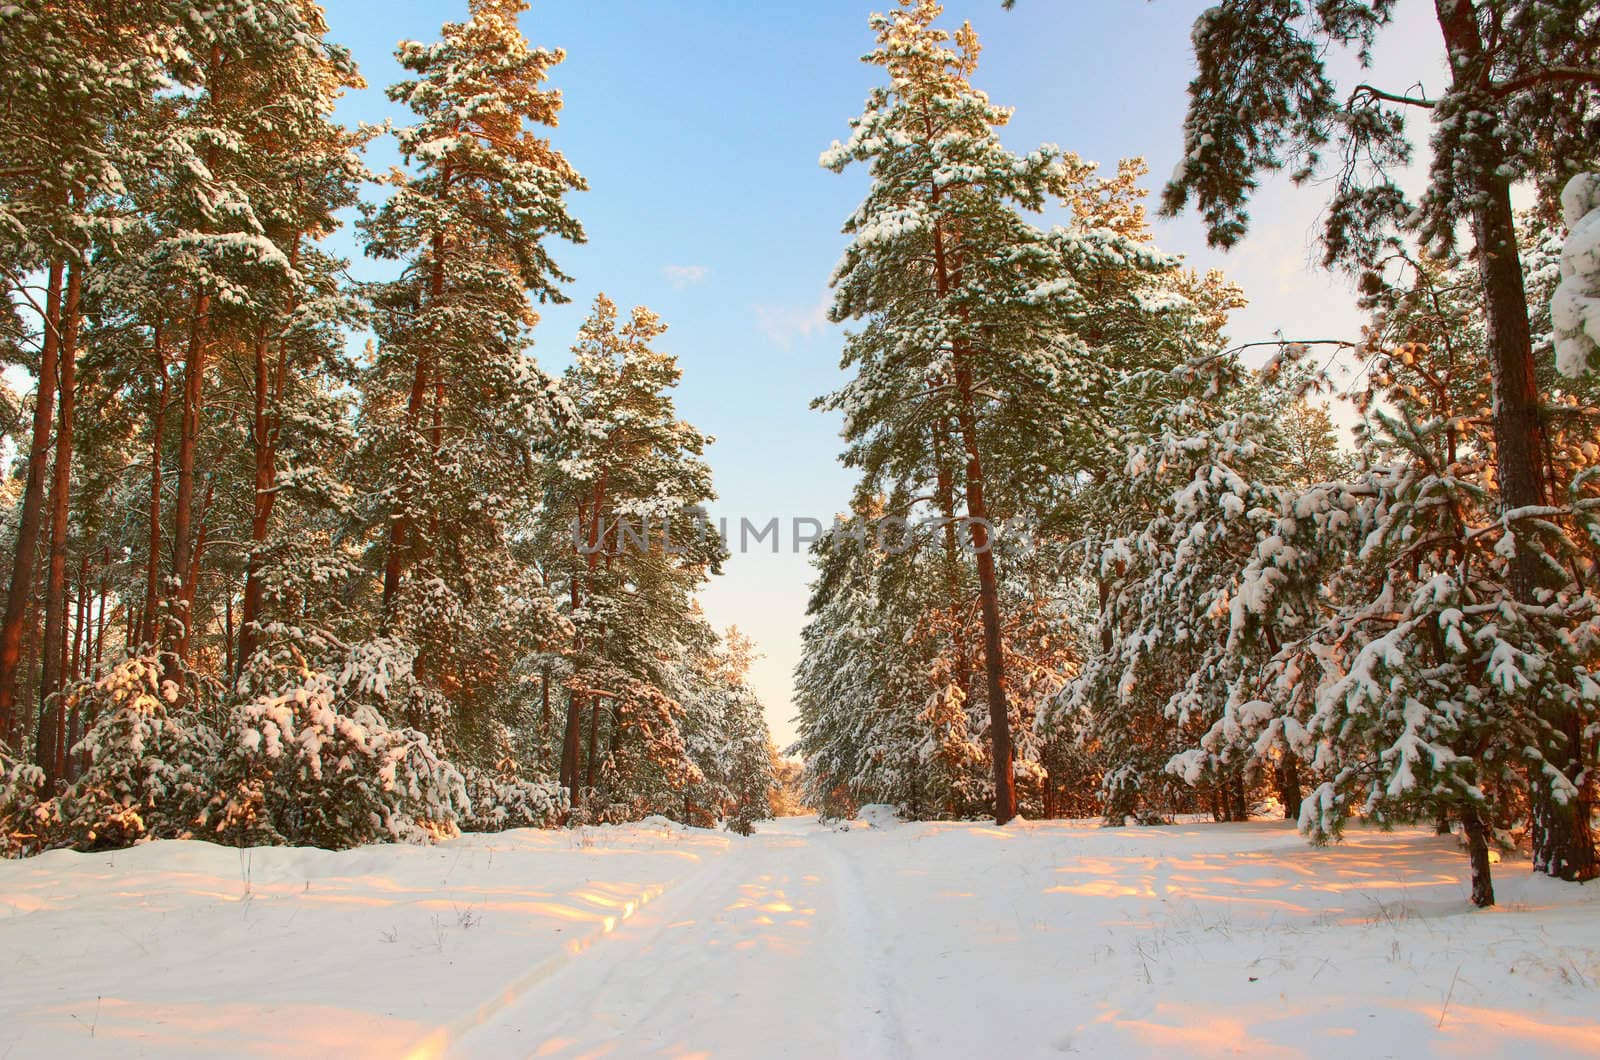 Winter frosty morning in a pine forest by subos